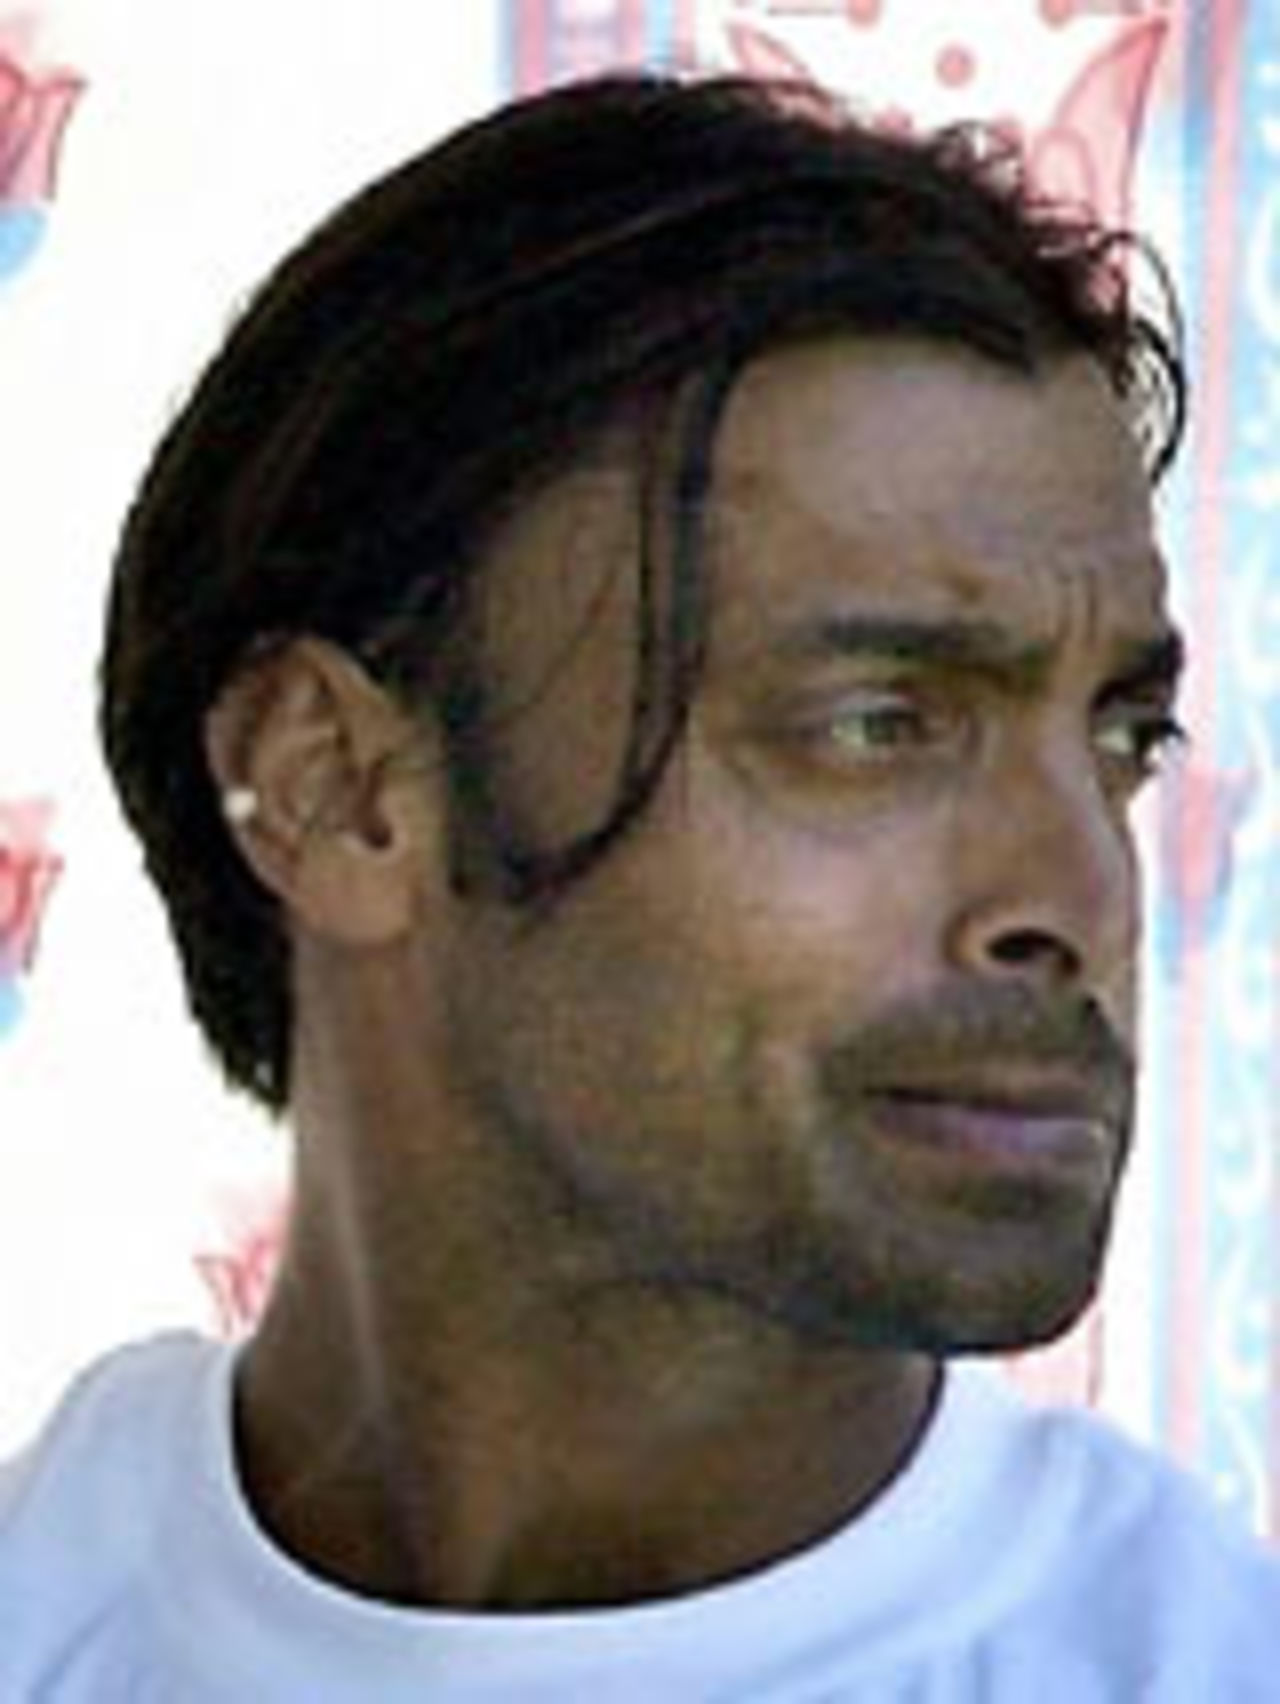 Shoaib Akhtar looking thoughtful, September 4, 2004